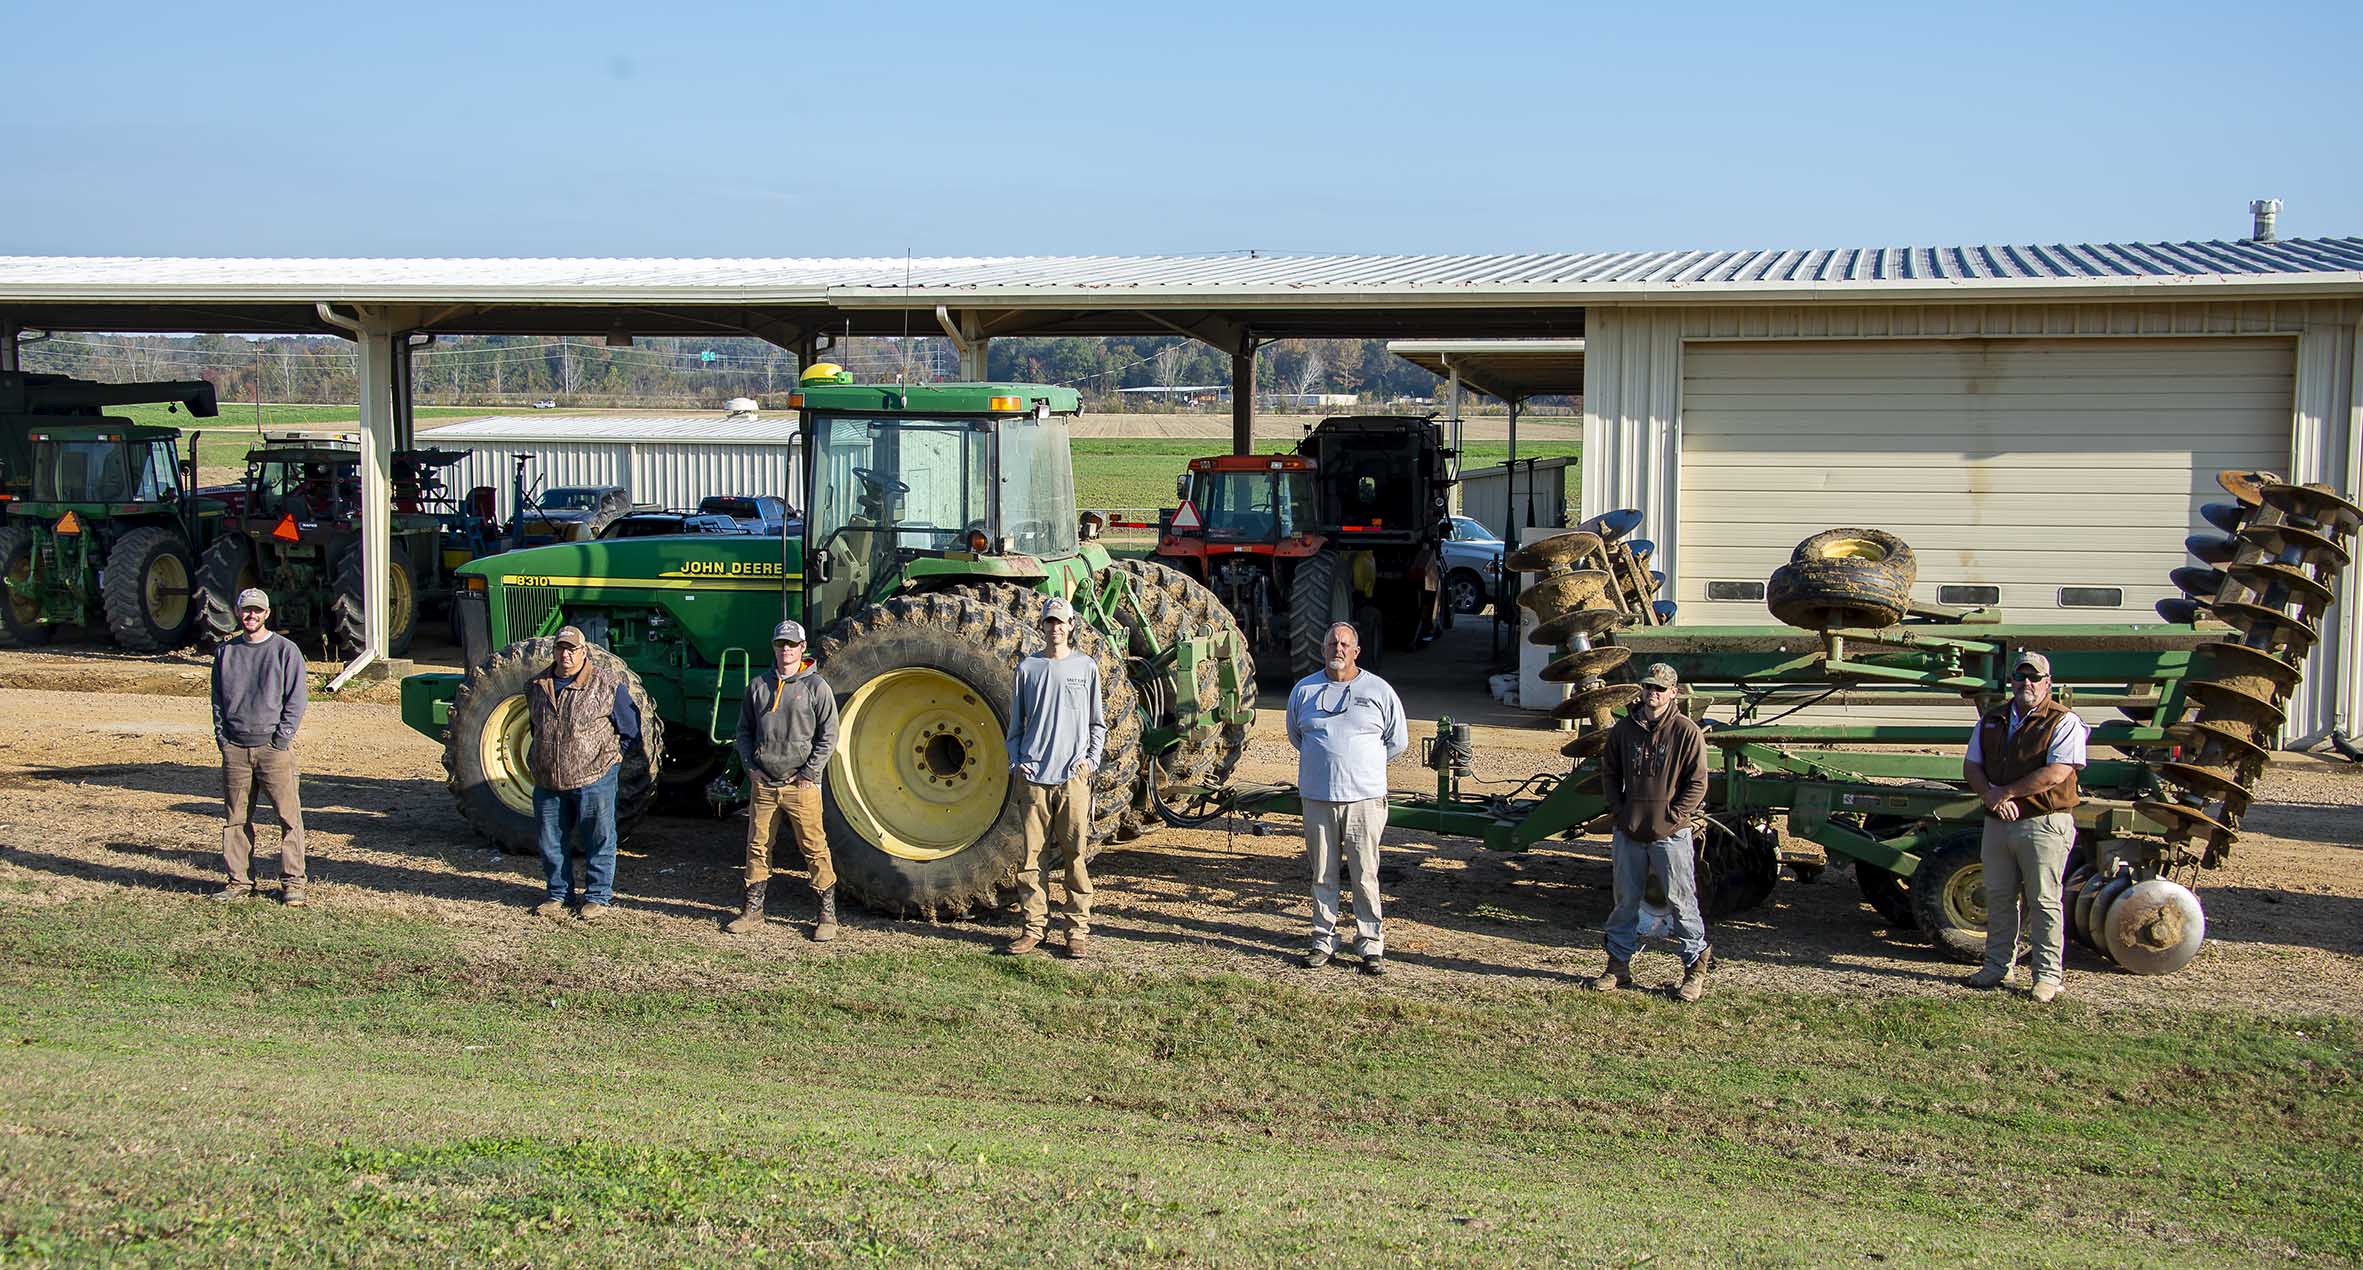 The farm crew includes (left to right) Hayden Carty, John Estes, Brandon Mast, Bailey Simpson, Eddie Stevens, Zach Pitts, and Keith Daniels. (Photo by Karen Brasher)